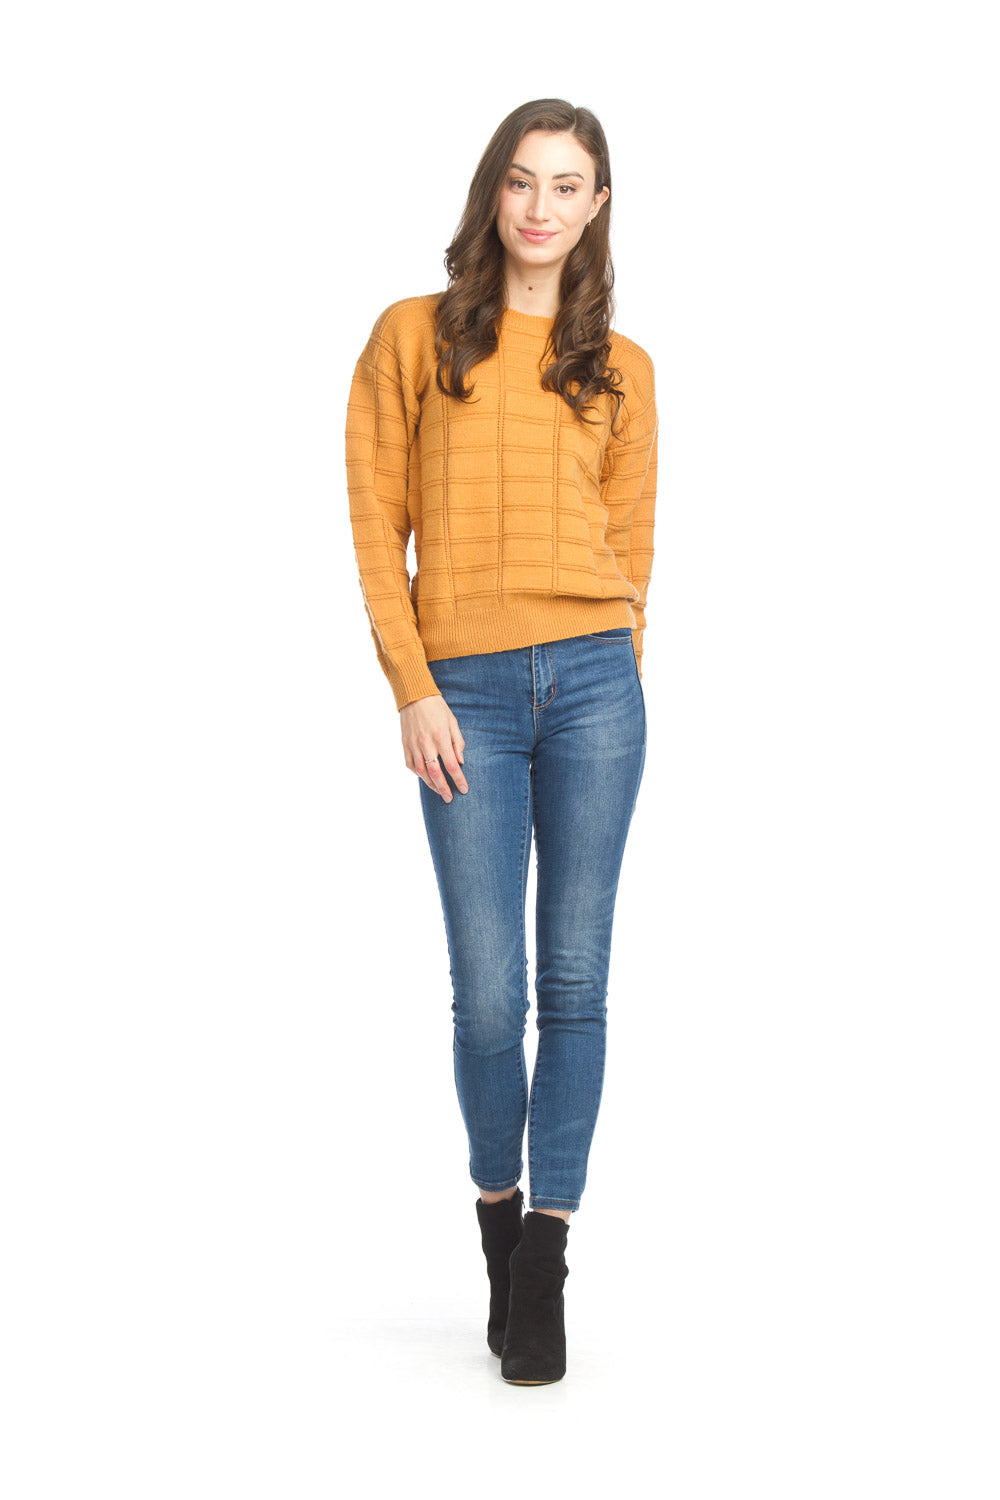 ST-15224 - Mustard - Pullover Sweater with Knit Details